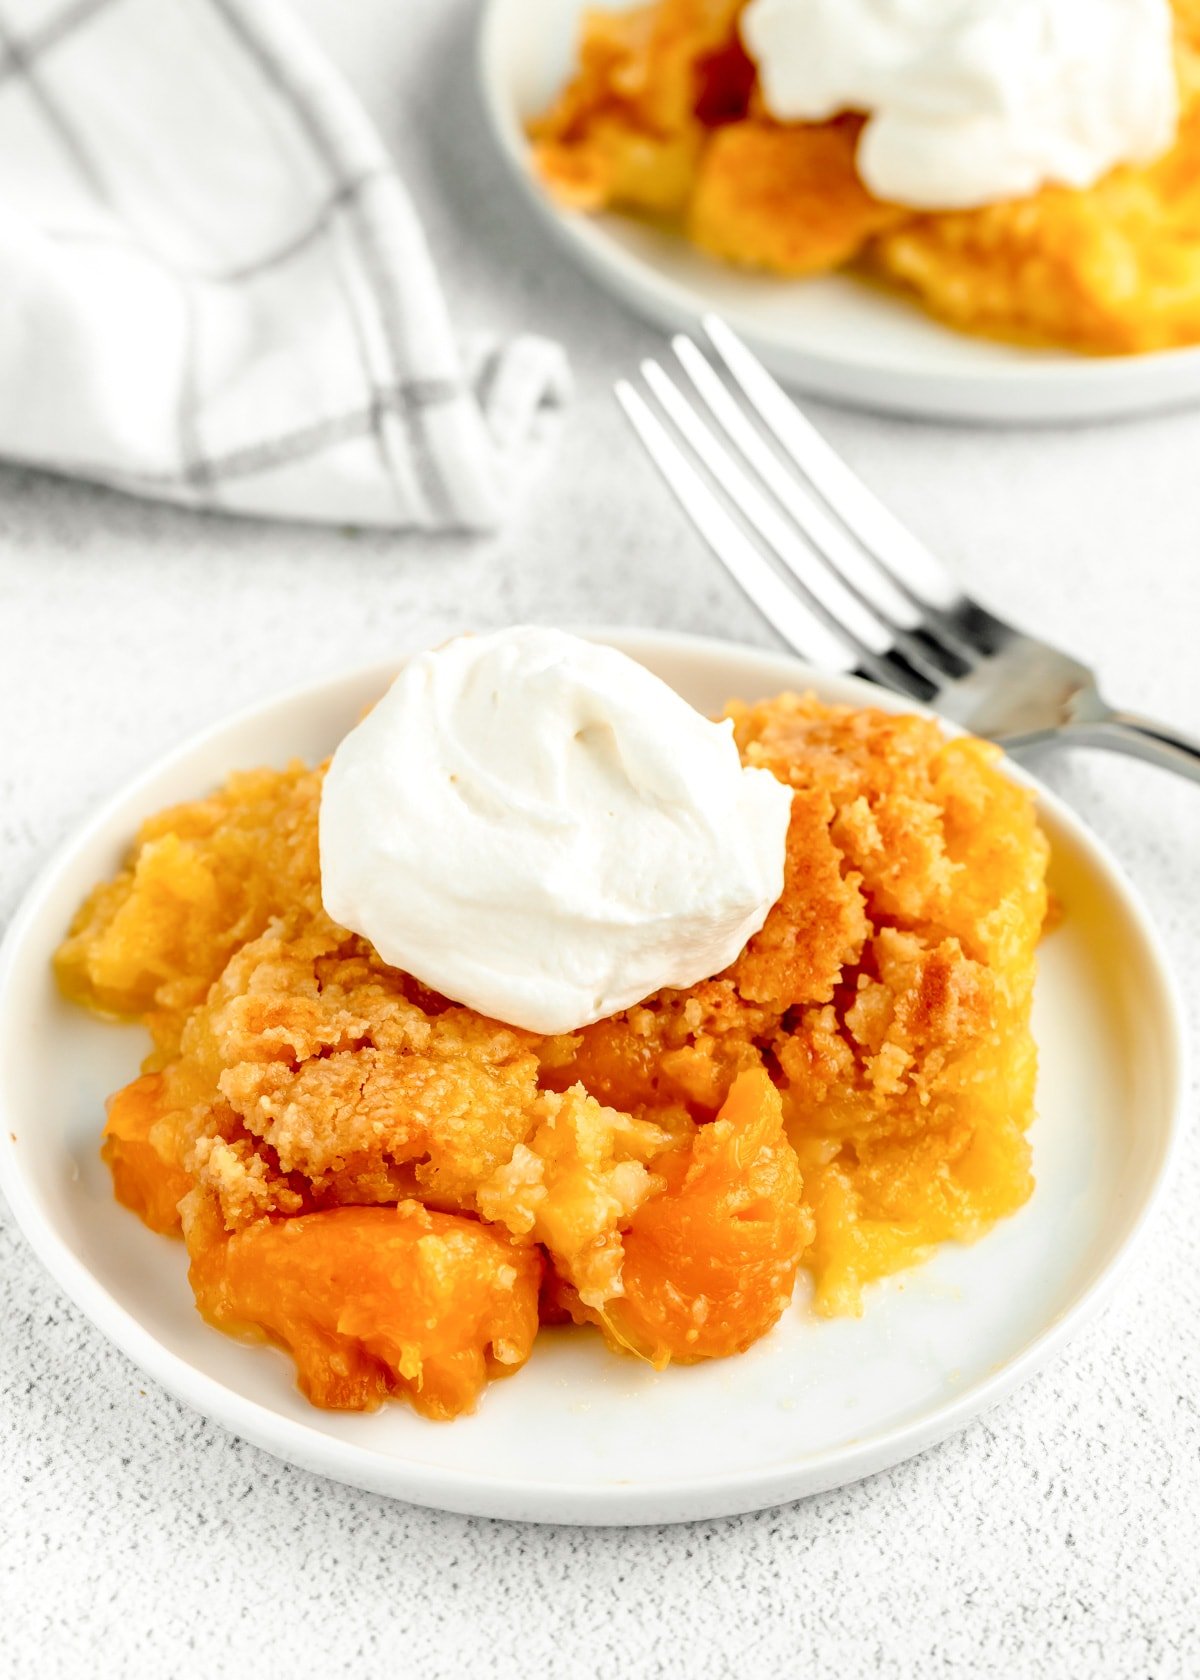 Easy Peach dump cake with whipped cream close up image.